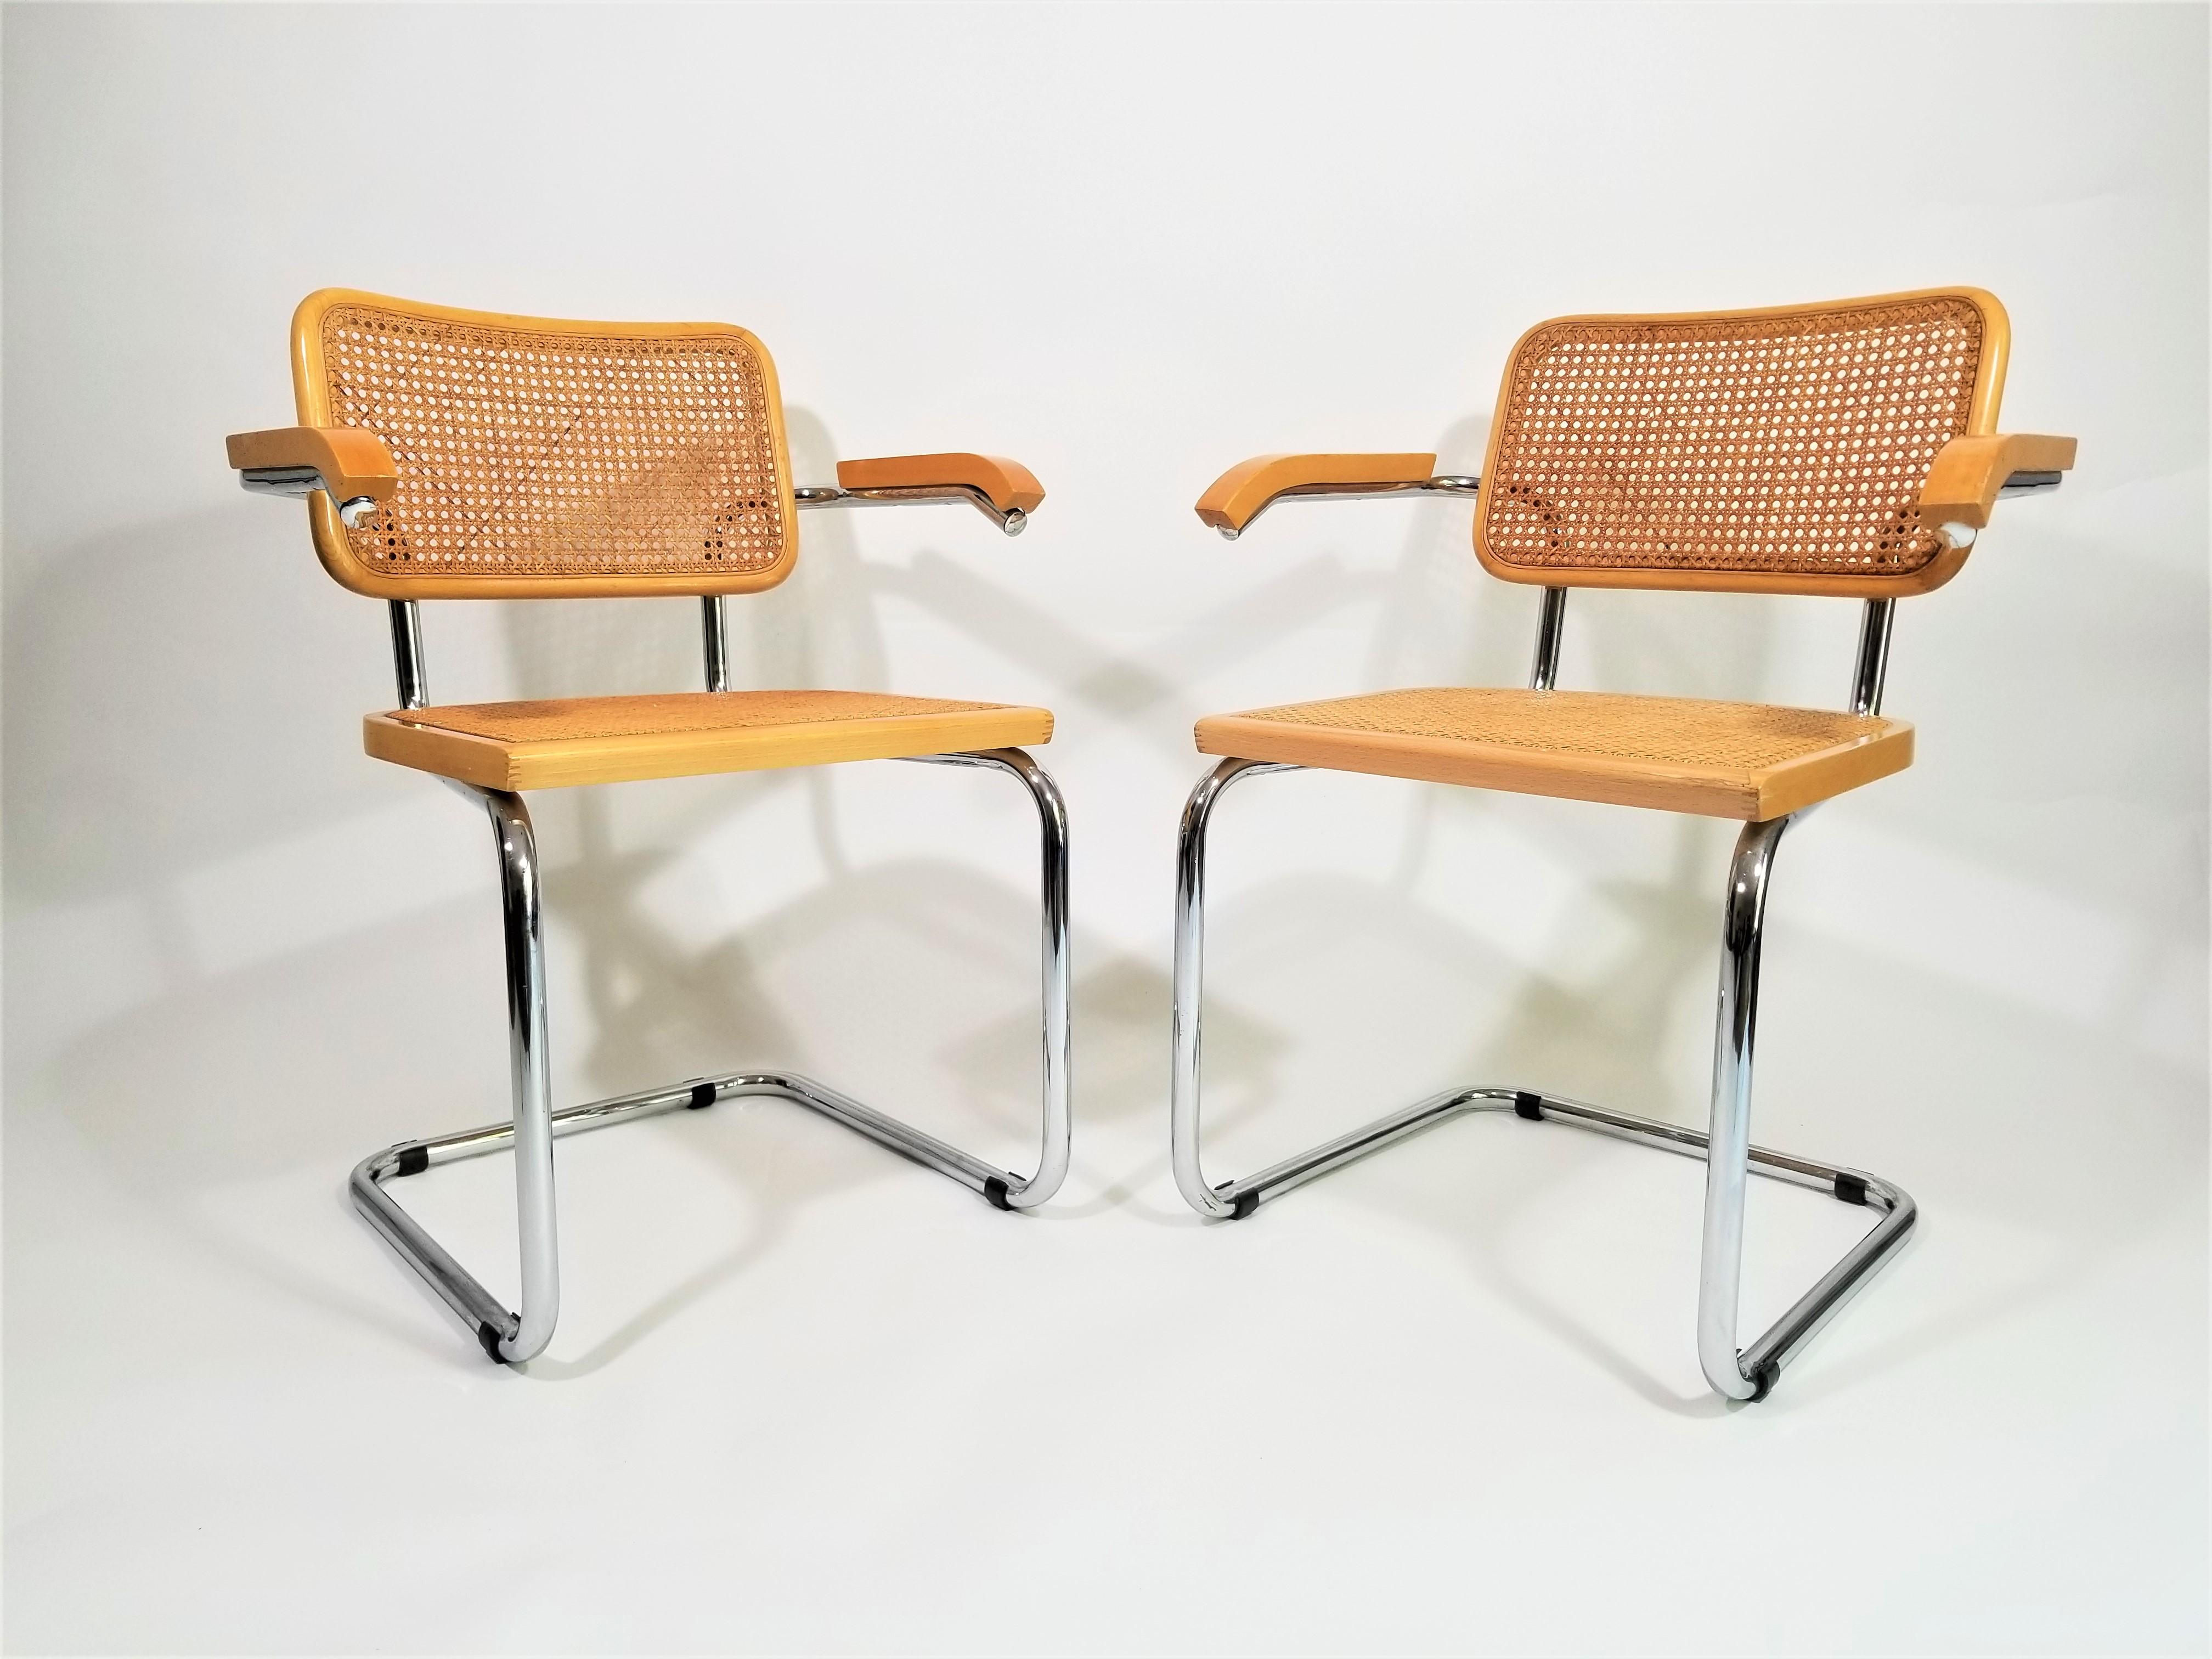 Stunning pair of midcentury Marcel Breuer Cesca armchairs in natural finish. Cane seats and backs. Classic chrome cantilever frames. Caning intact. We polish all chrome. Black protectors on chrome are removable.